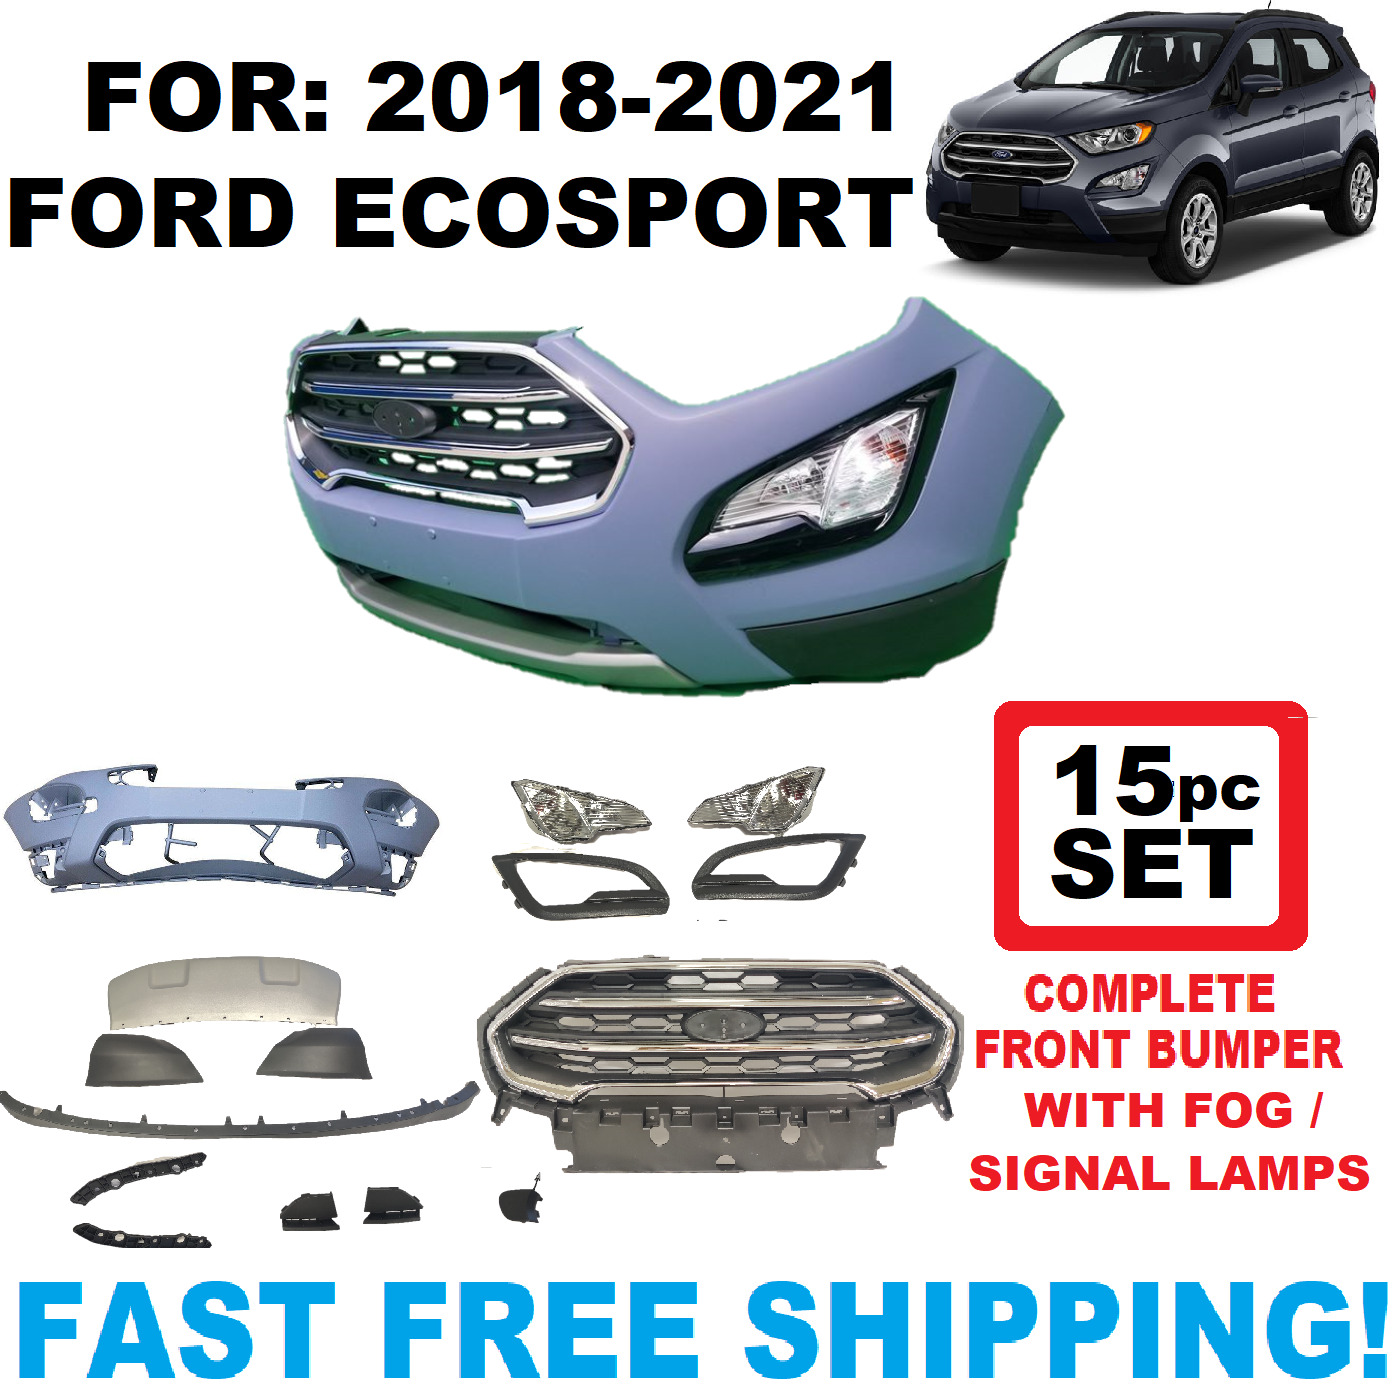 FITS 2018 2019 2020 2021 FORD ECOSPORT FRONT BUMPER COVER 15PC SET